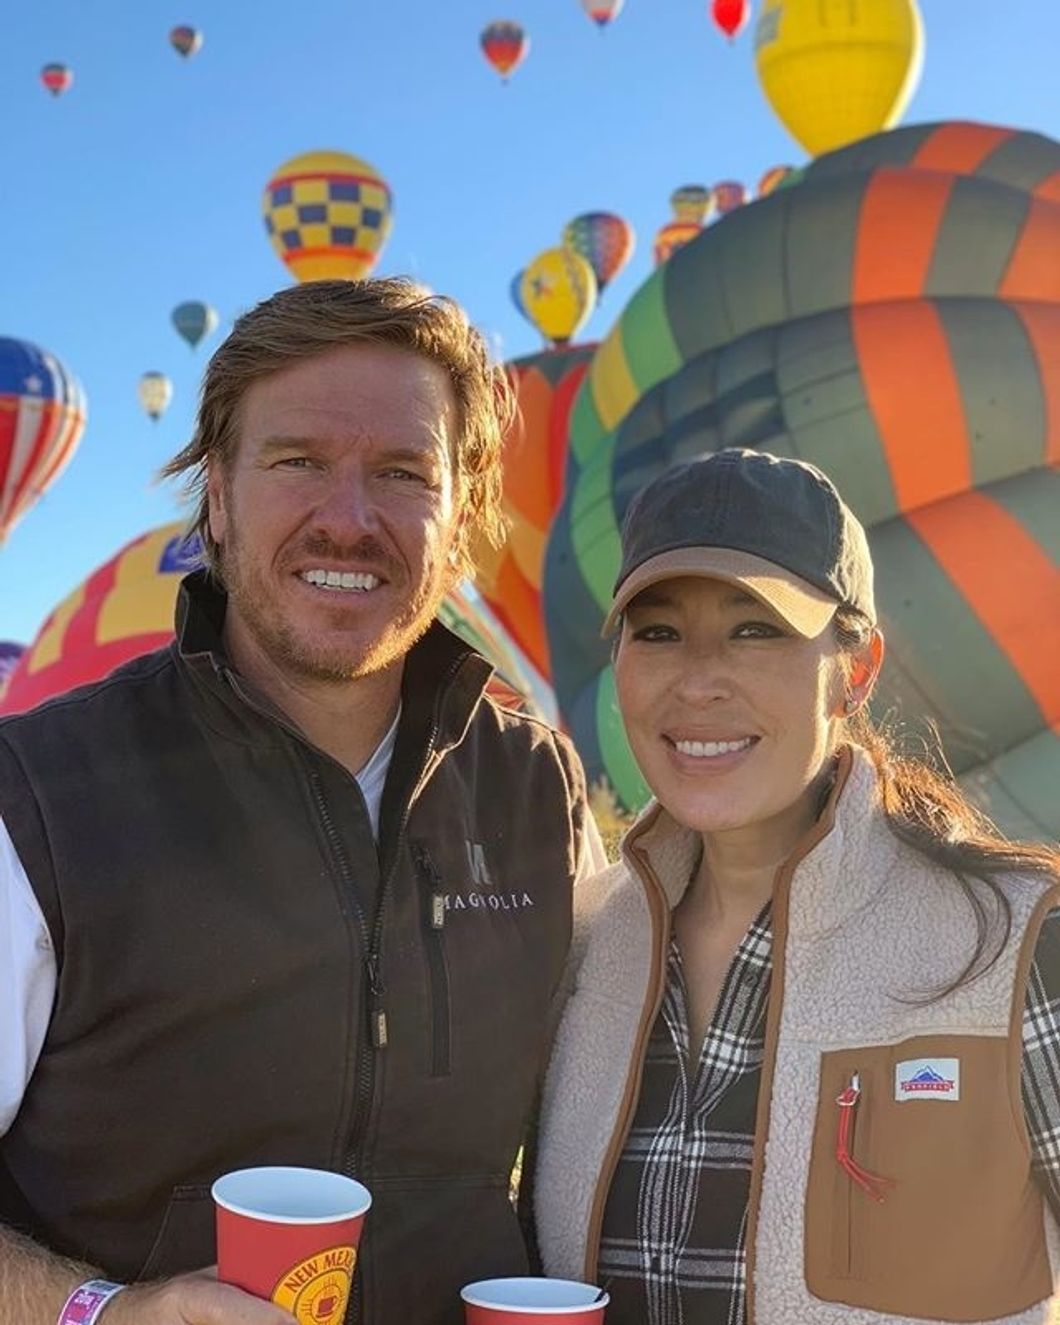 6 Reasons The World Needs More People Like Chip and Joanna Gaines